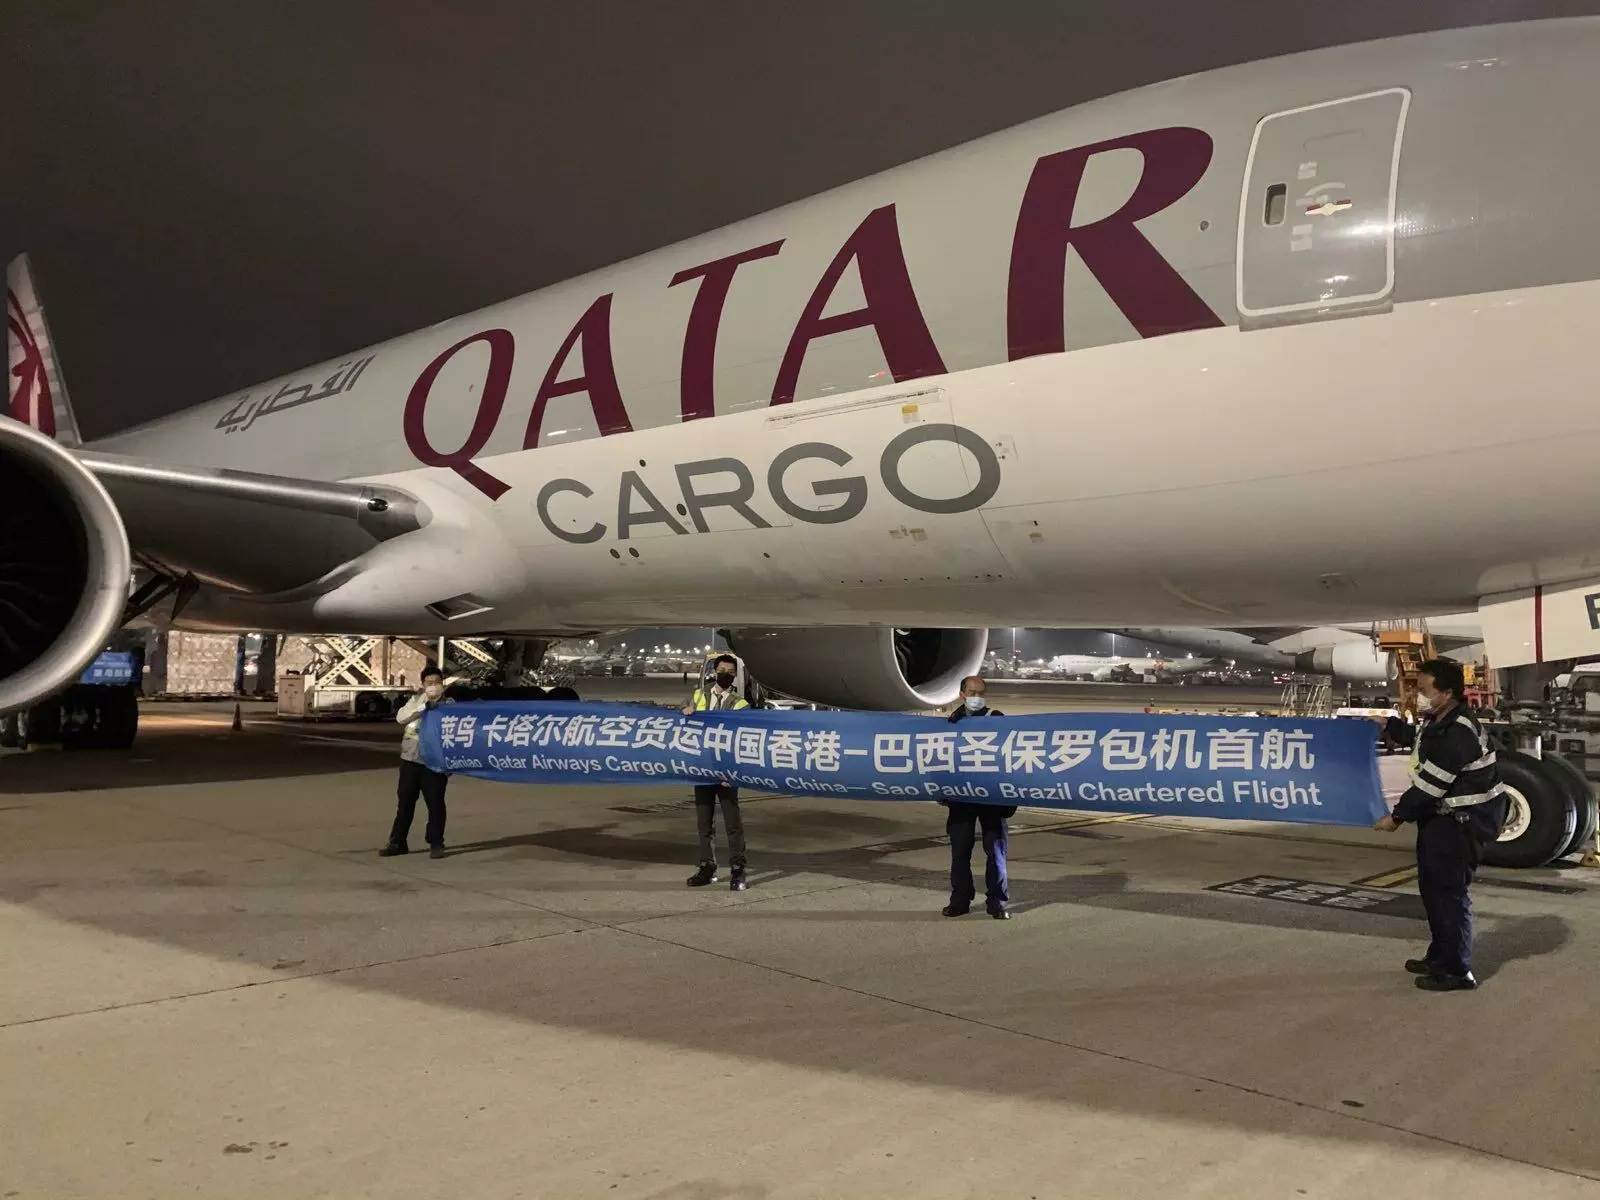 Qatar Airways Cargo teams up with Cainiao, launches weekly charter linking China, Brazil